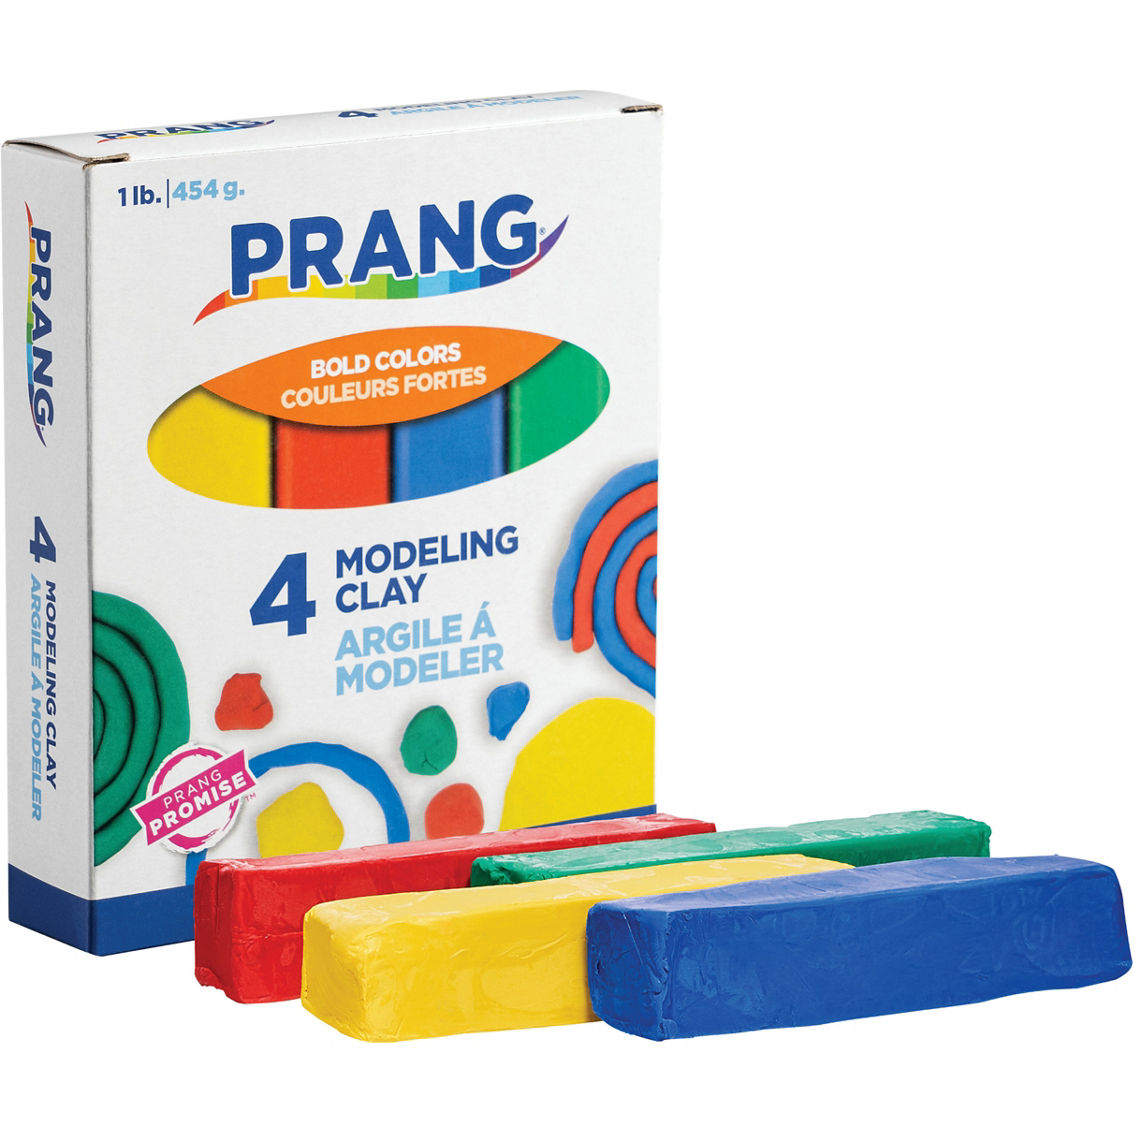 Prang Modeling Clay Set, Assorted Colors, 4 ct. - Image 3 of 4